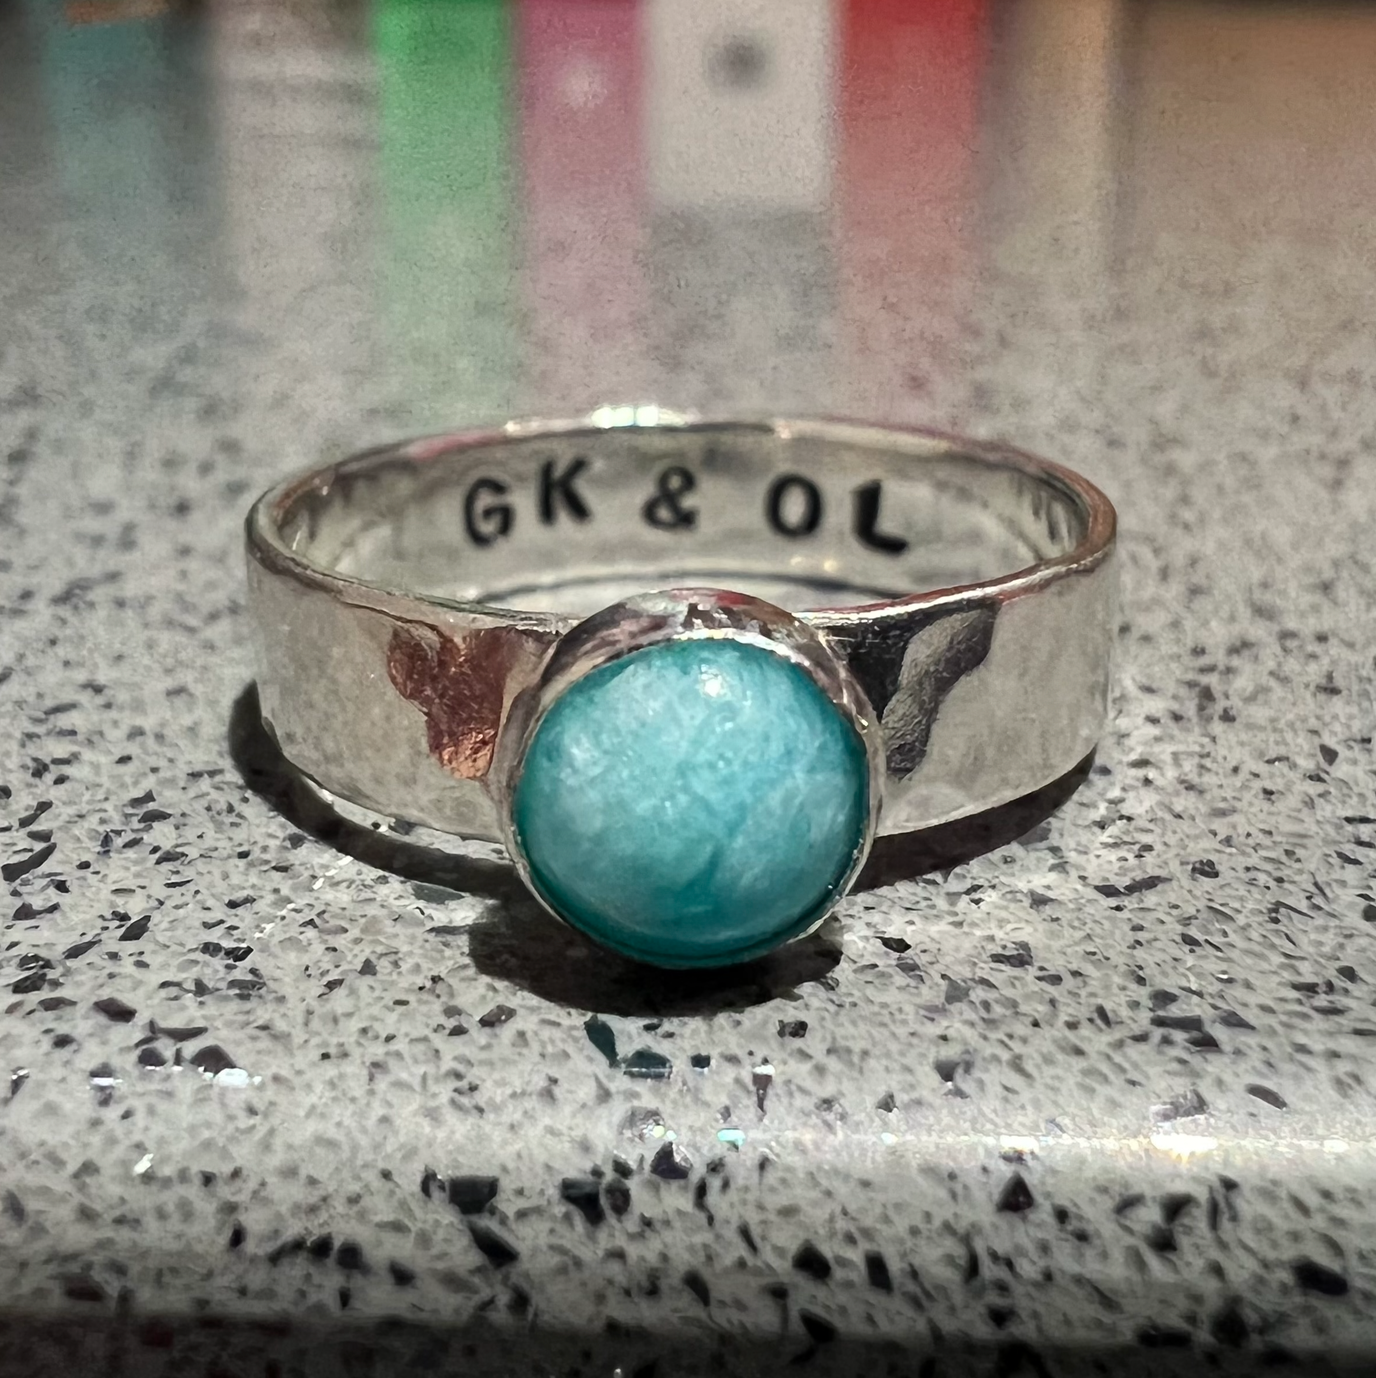 Small round gemstone ring with engraving